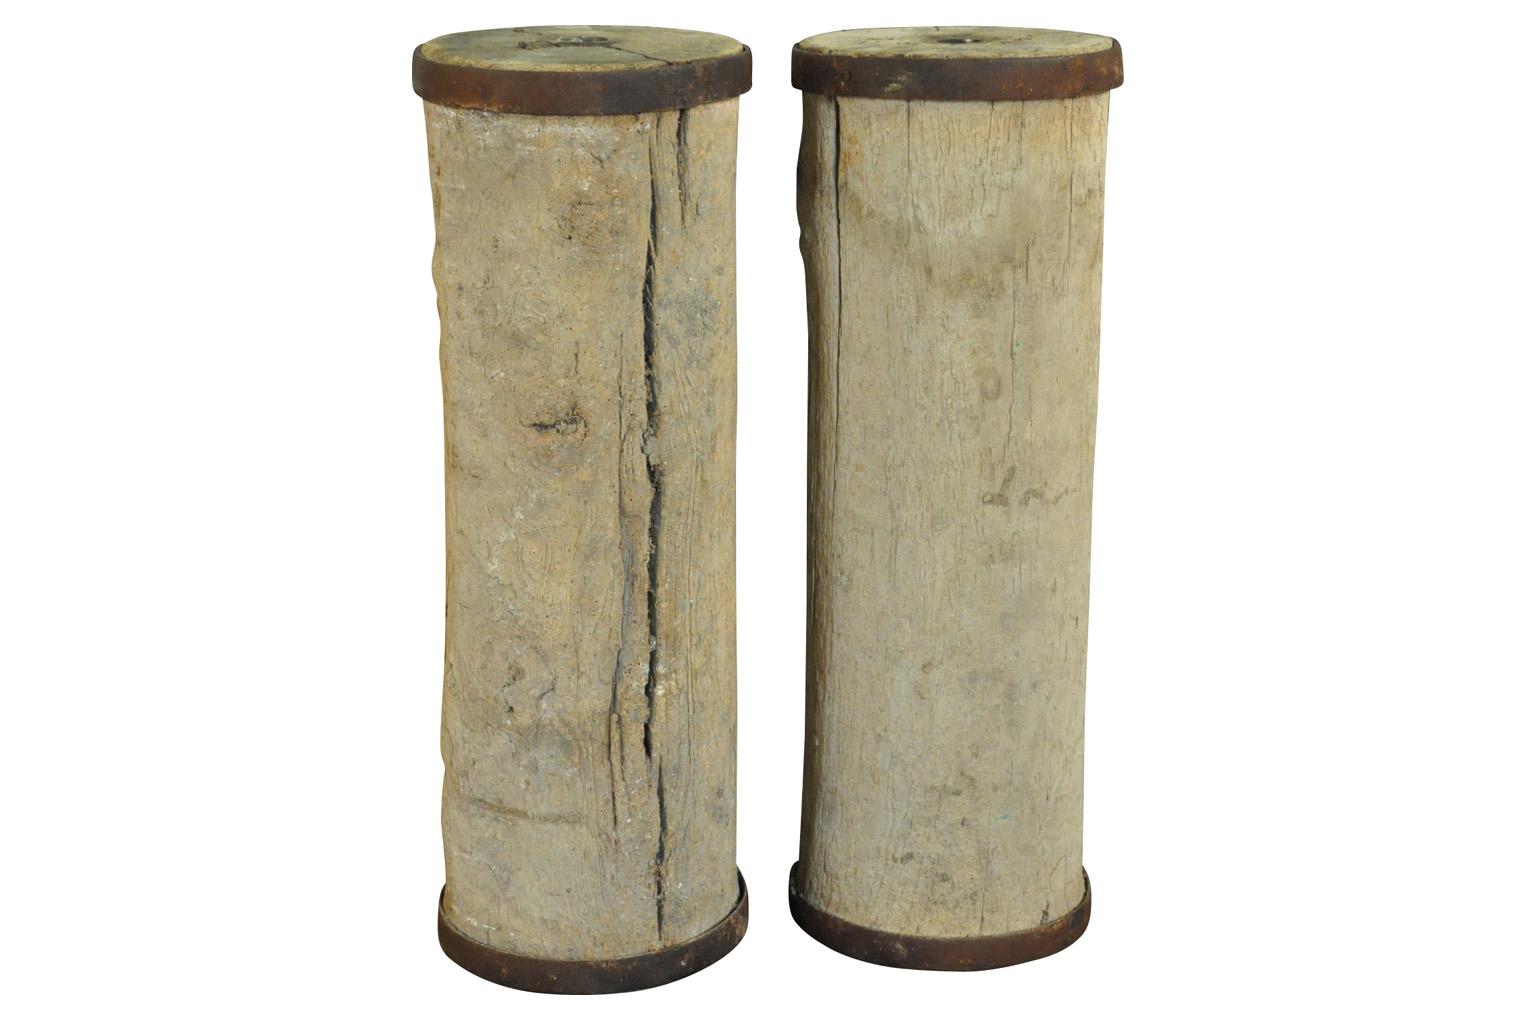 A wonderful pair of early 19th century agricultural cylinders used in the fields - now as terrific pedestals. Solid wood with iron straps.